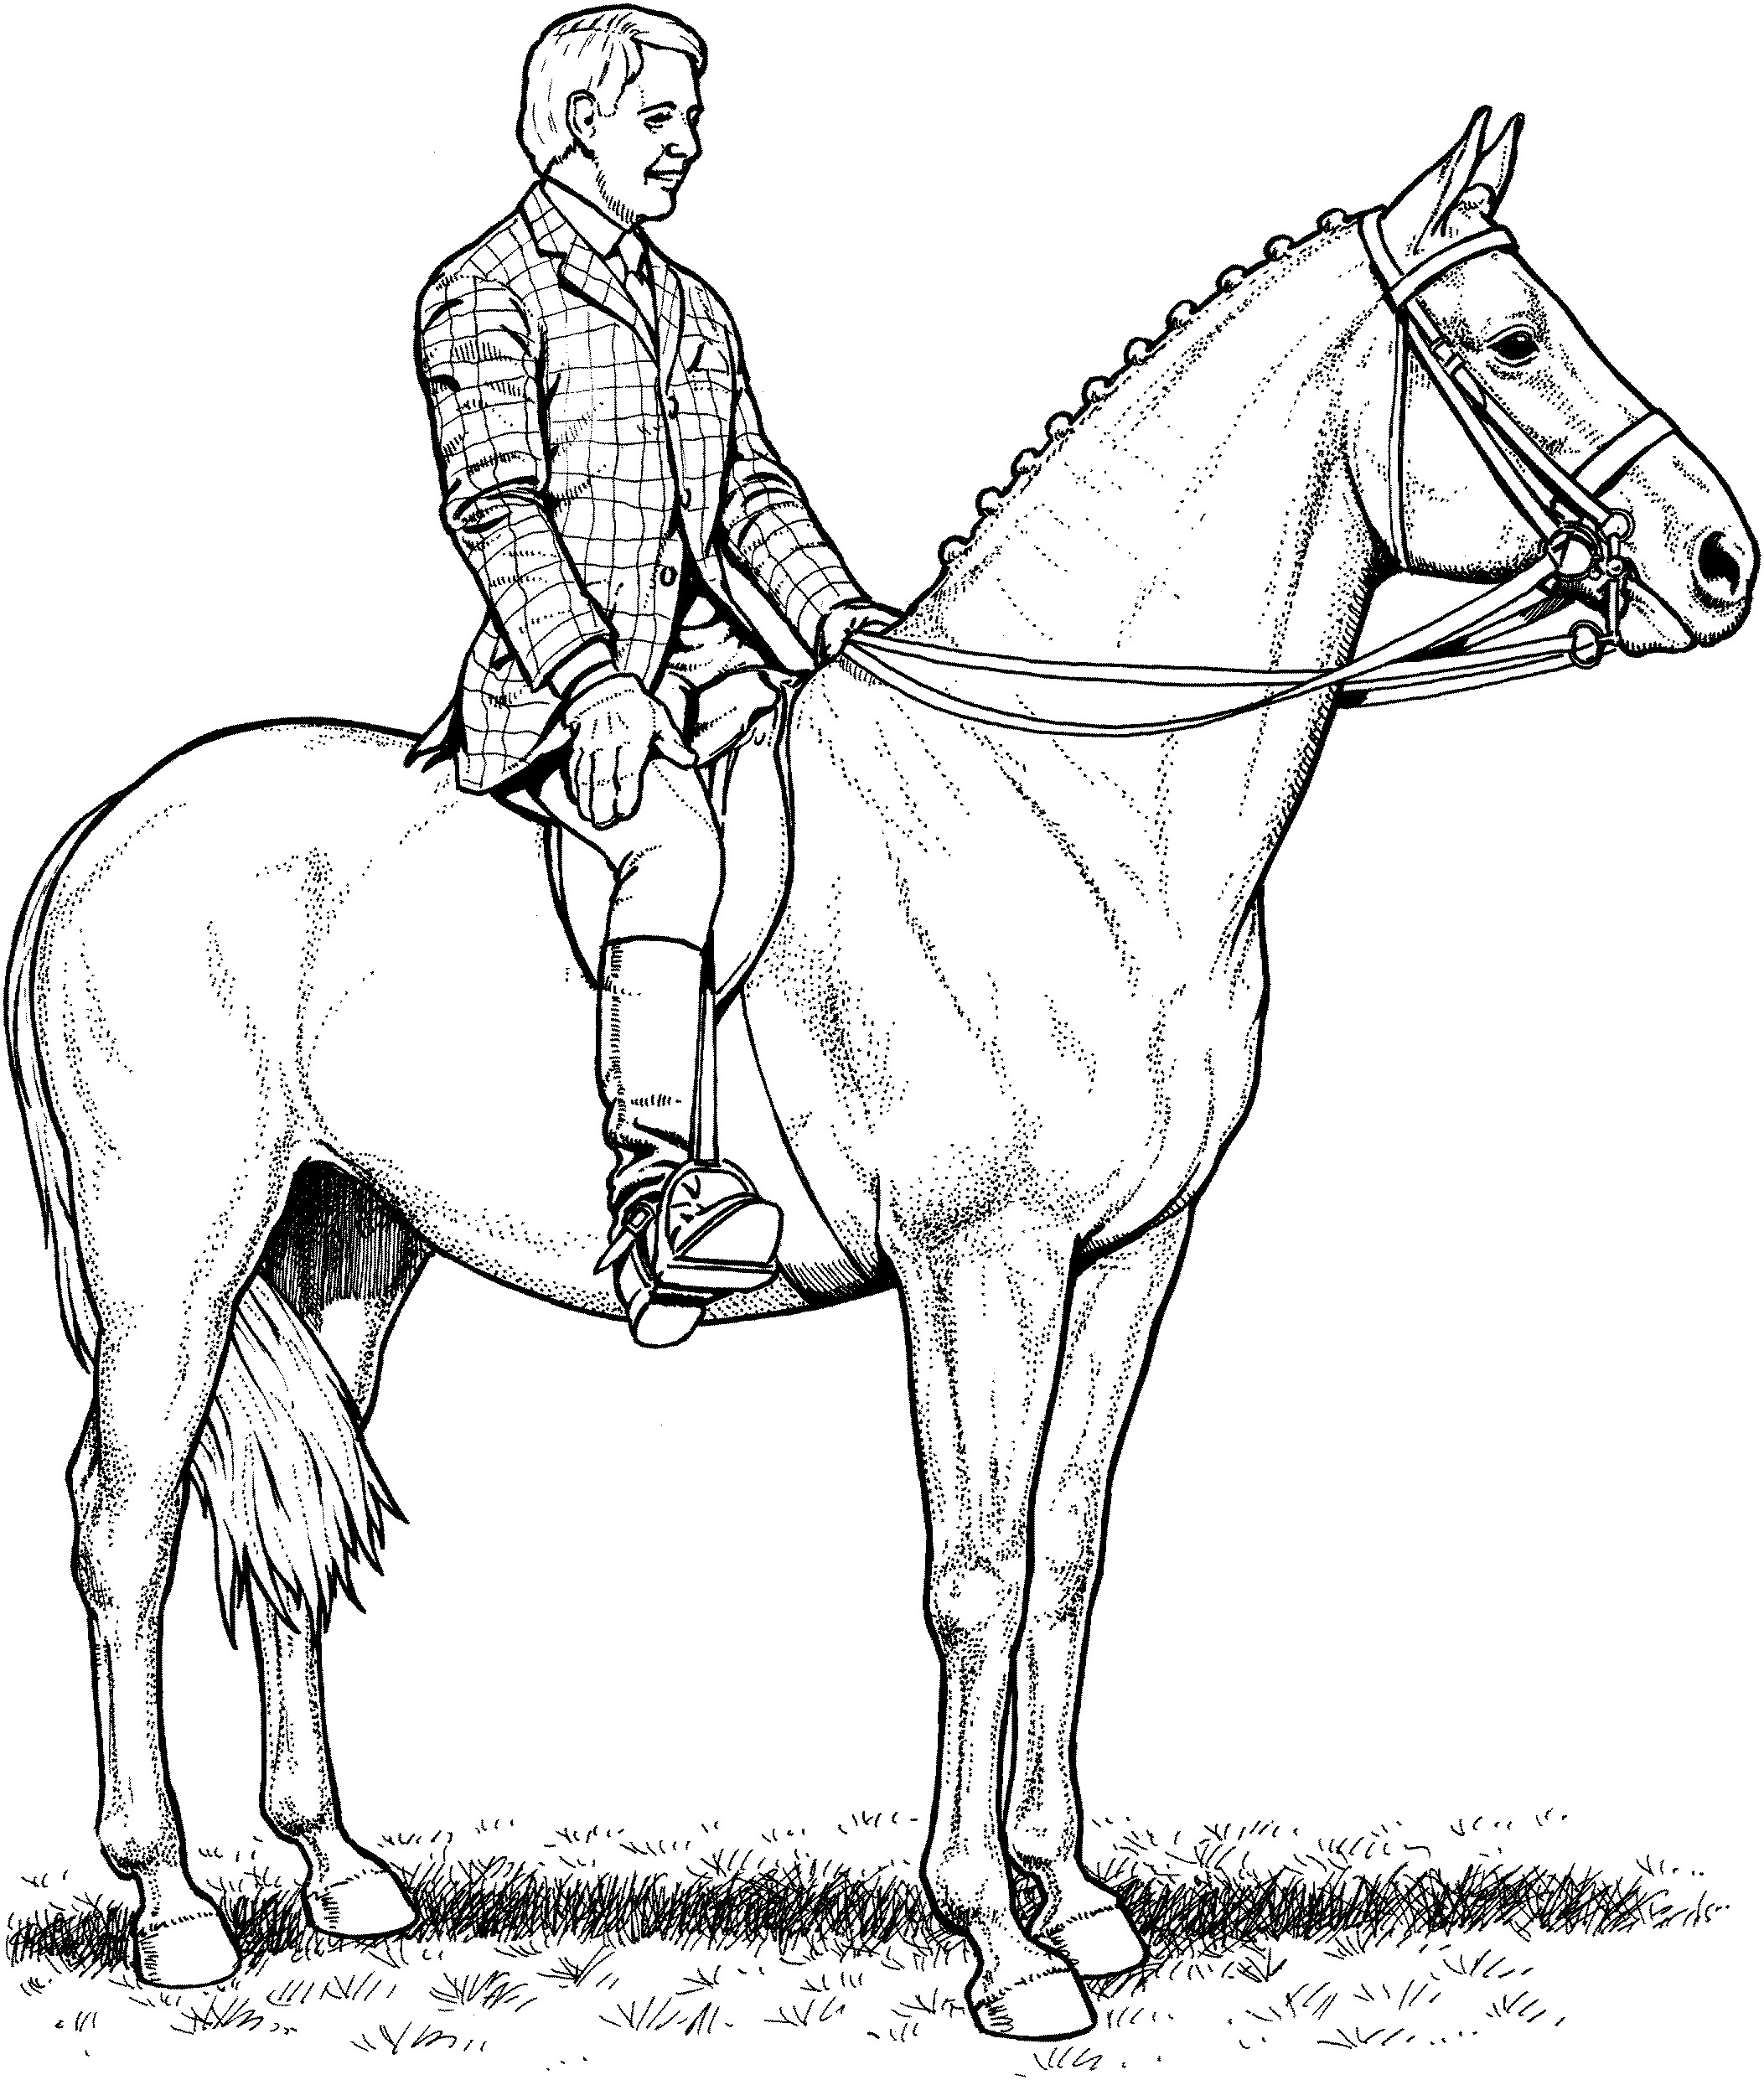 Horse Jumping Coloring Pages at GetColorings.com | Free ...